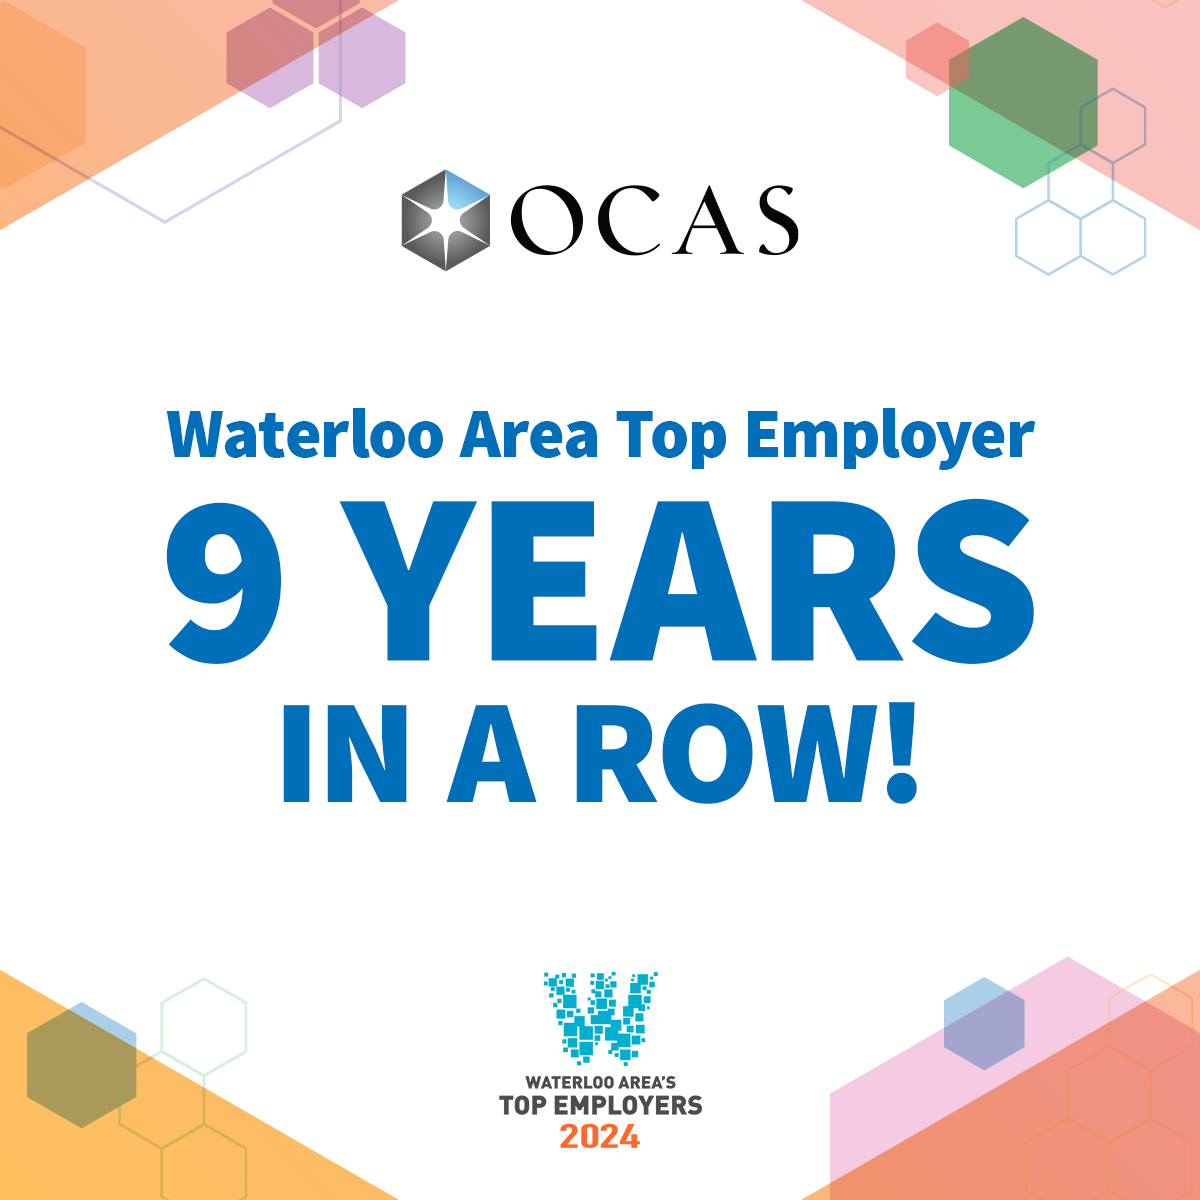 Did you know that OCAS has been one of Waterloo Area’s Top Employers for nine years in a row? It’s an honour to be recognized for our commitment to our employees. To learn more about OCAS and what makes us awesome, please visit ow.ly/gH9t50QL4vG.